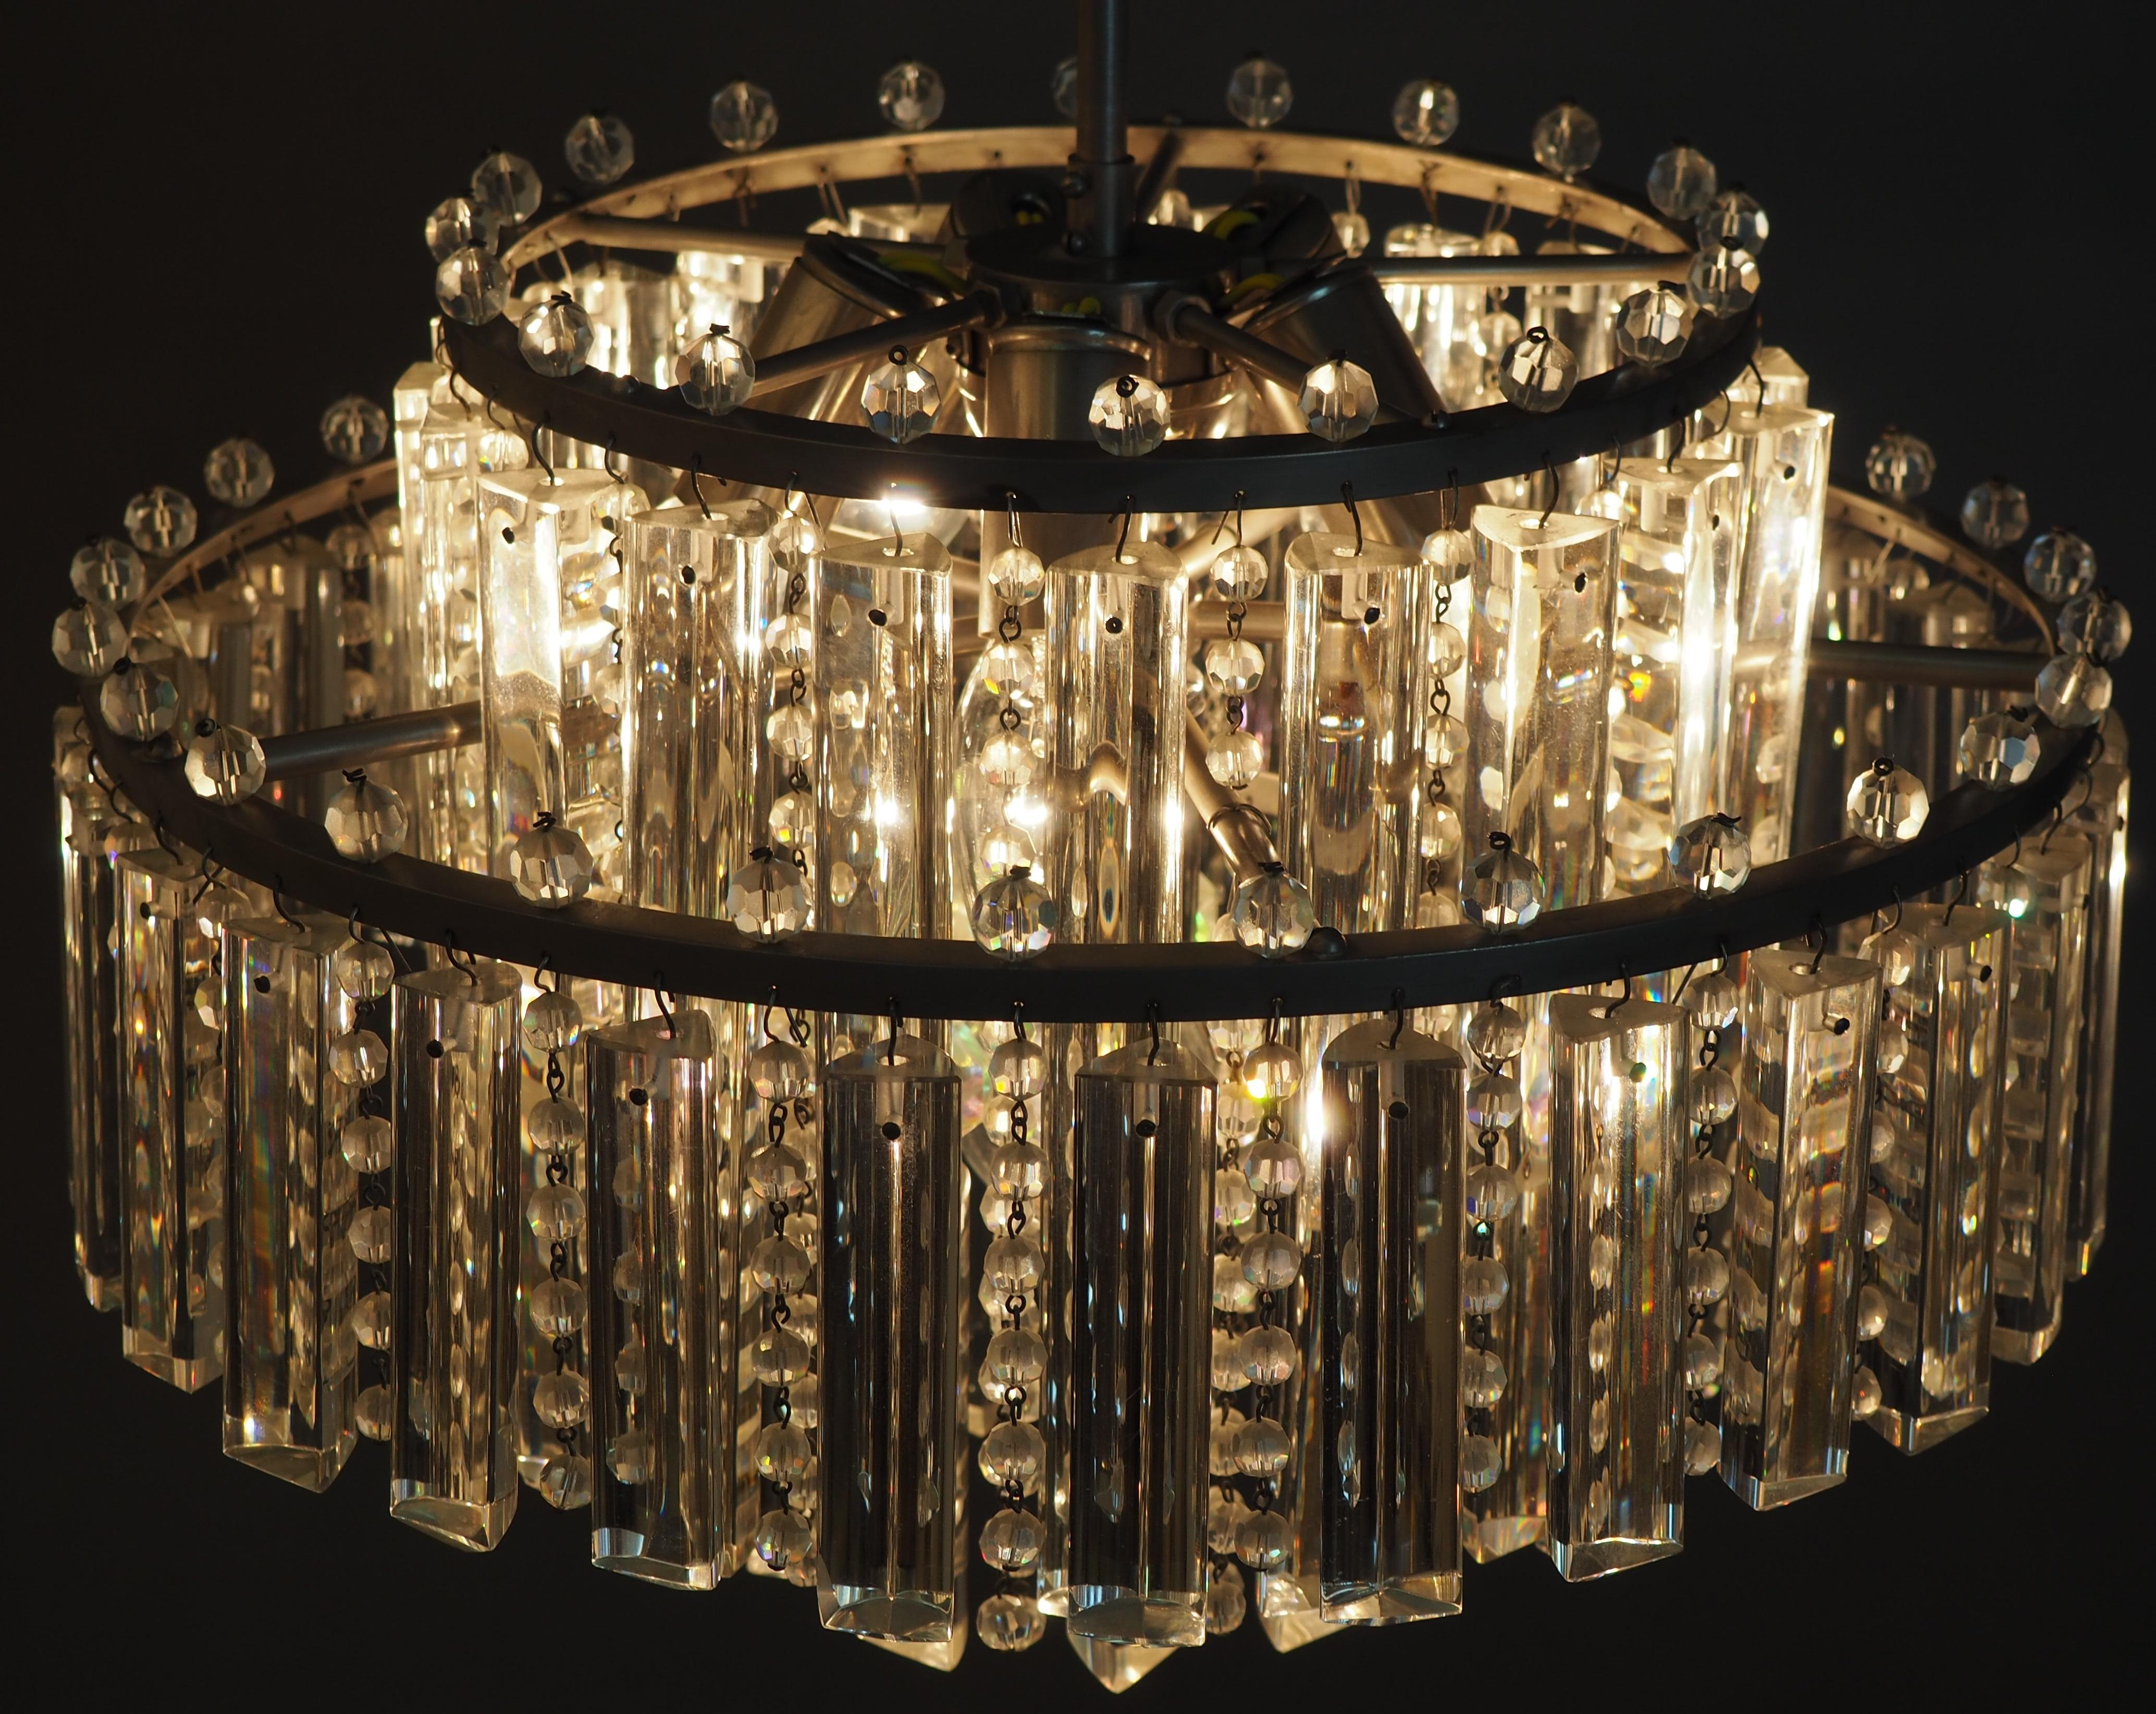 German Rare Heavy Cut Glass and Strass Chandelier by Palwa, circa 1960s